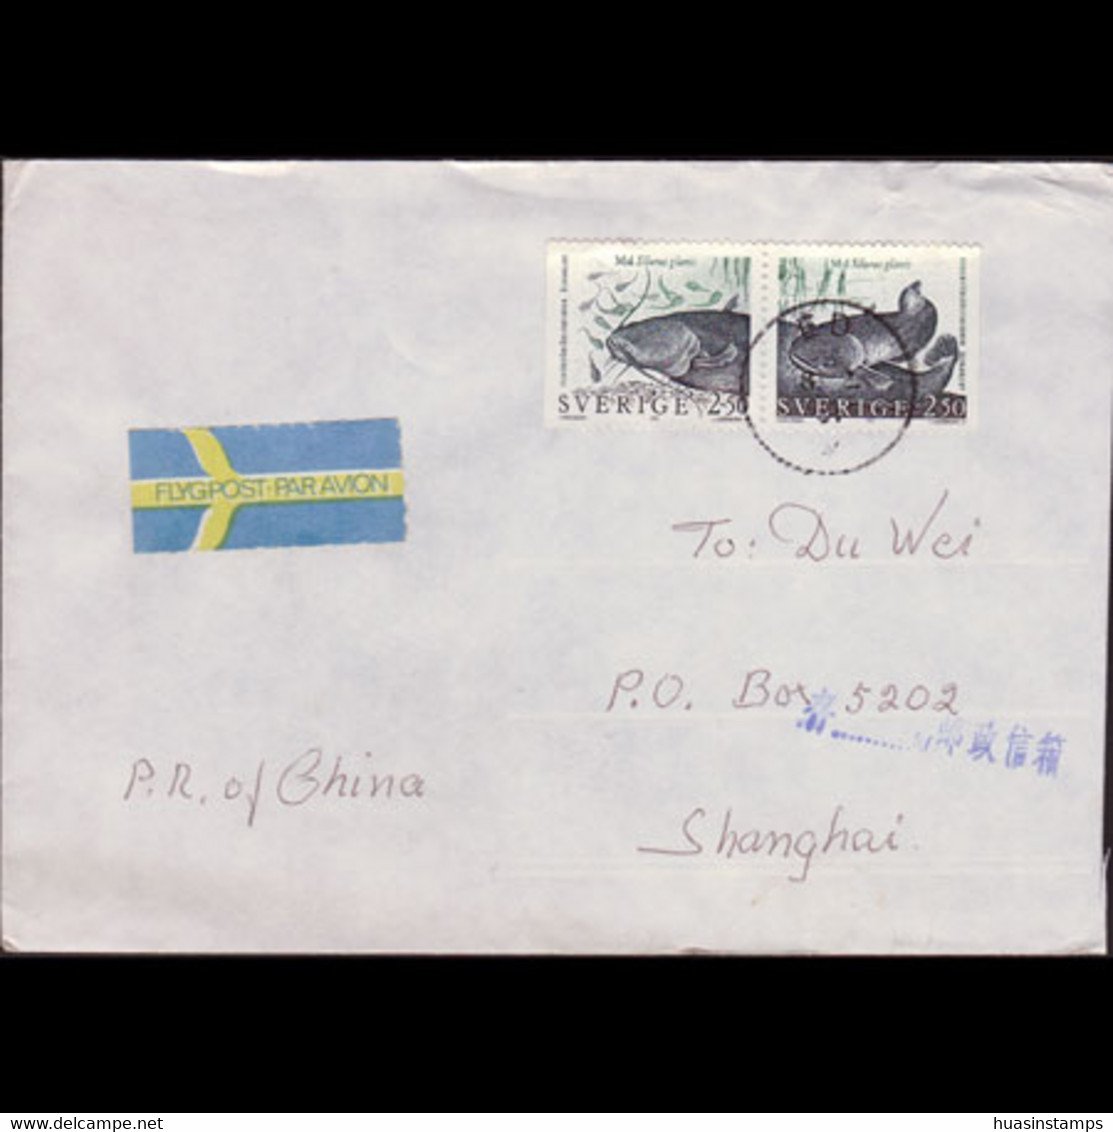 SWEDEN 1991 - Cover Used - With 1867-8 Fish - Covers & Documents